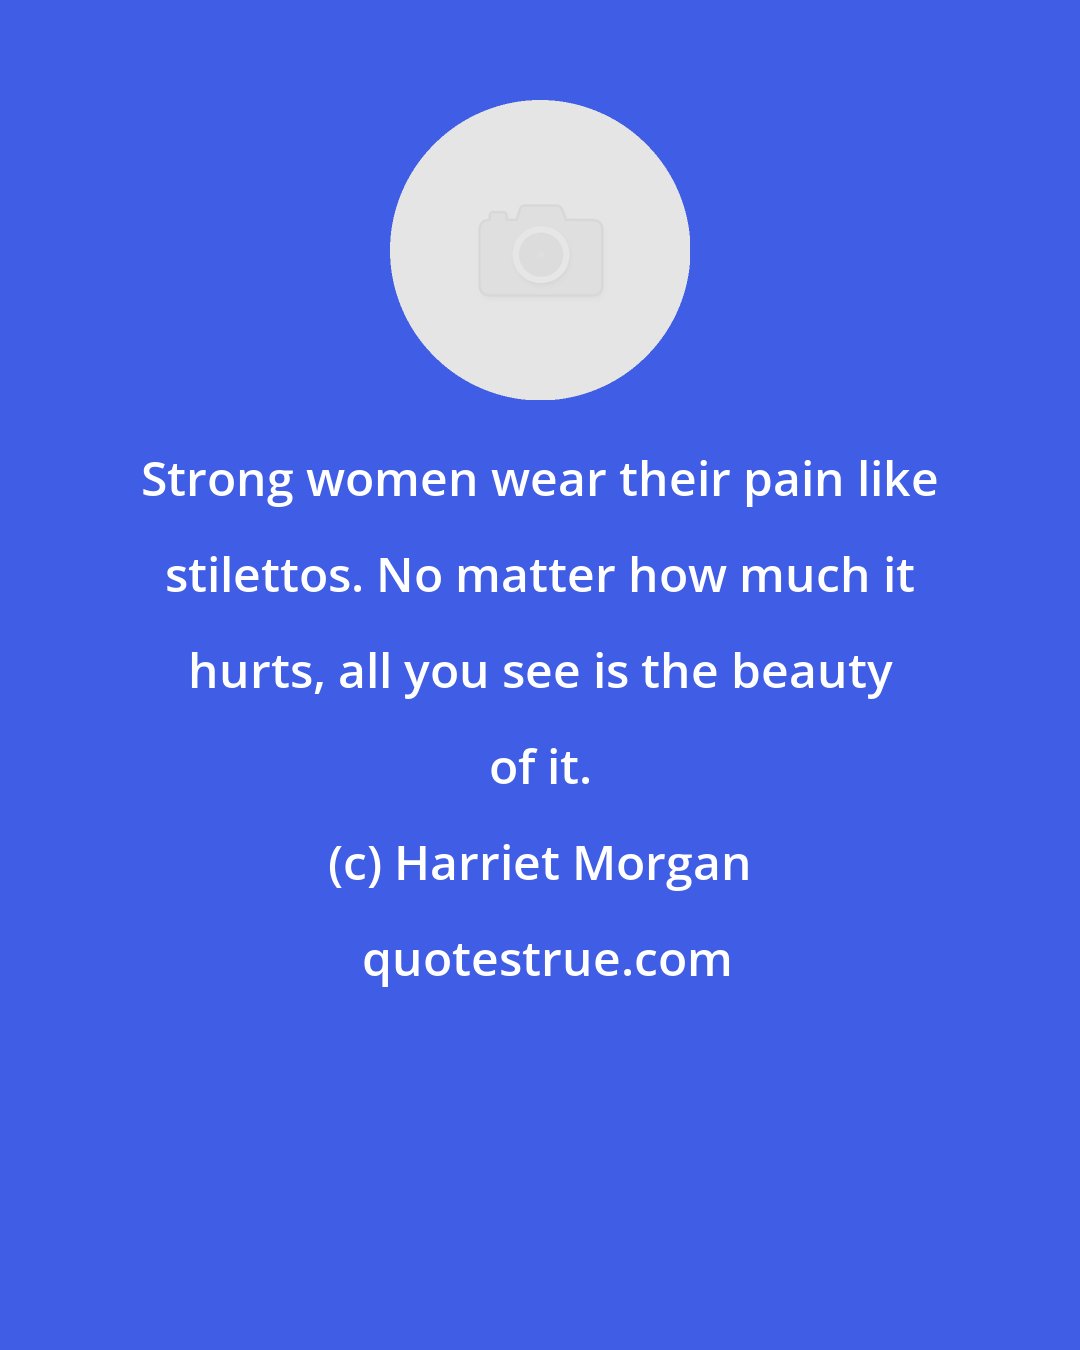 Harriet Morgan: Strong women wear their pain like stilettos. No matter how much it hurts, all you see is the beauty of it.